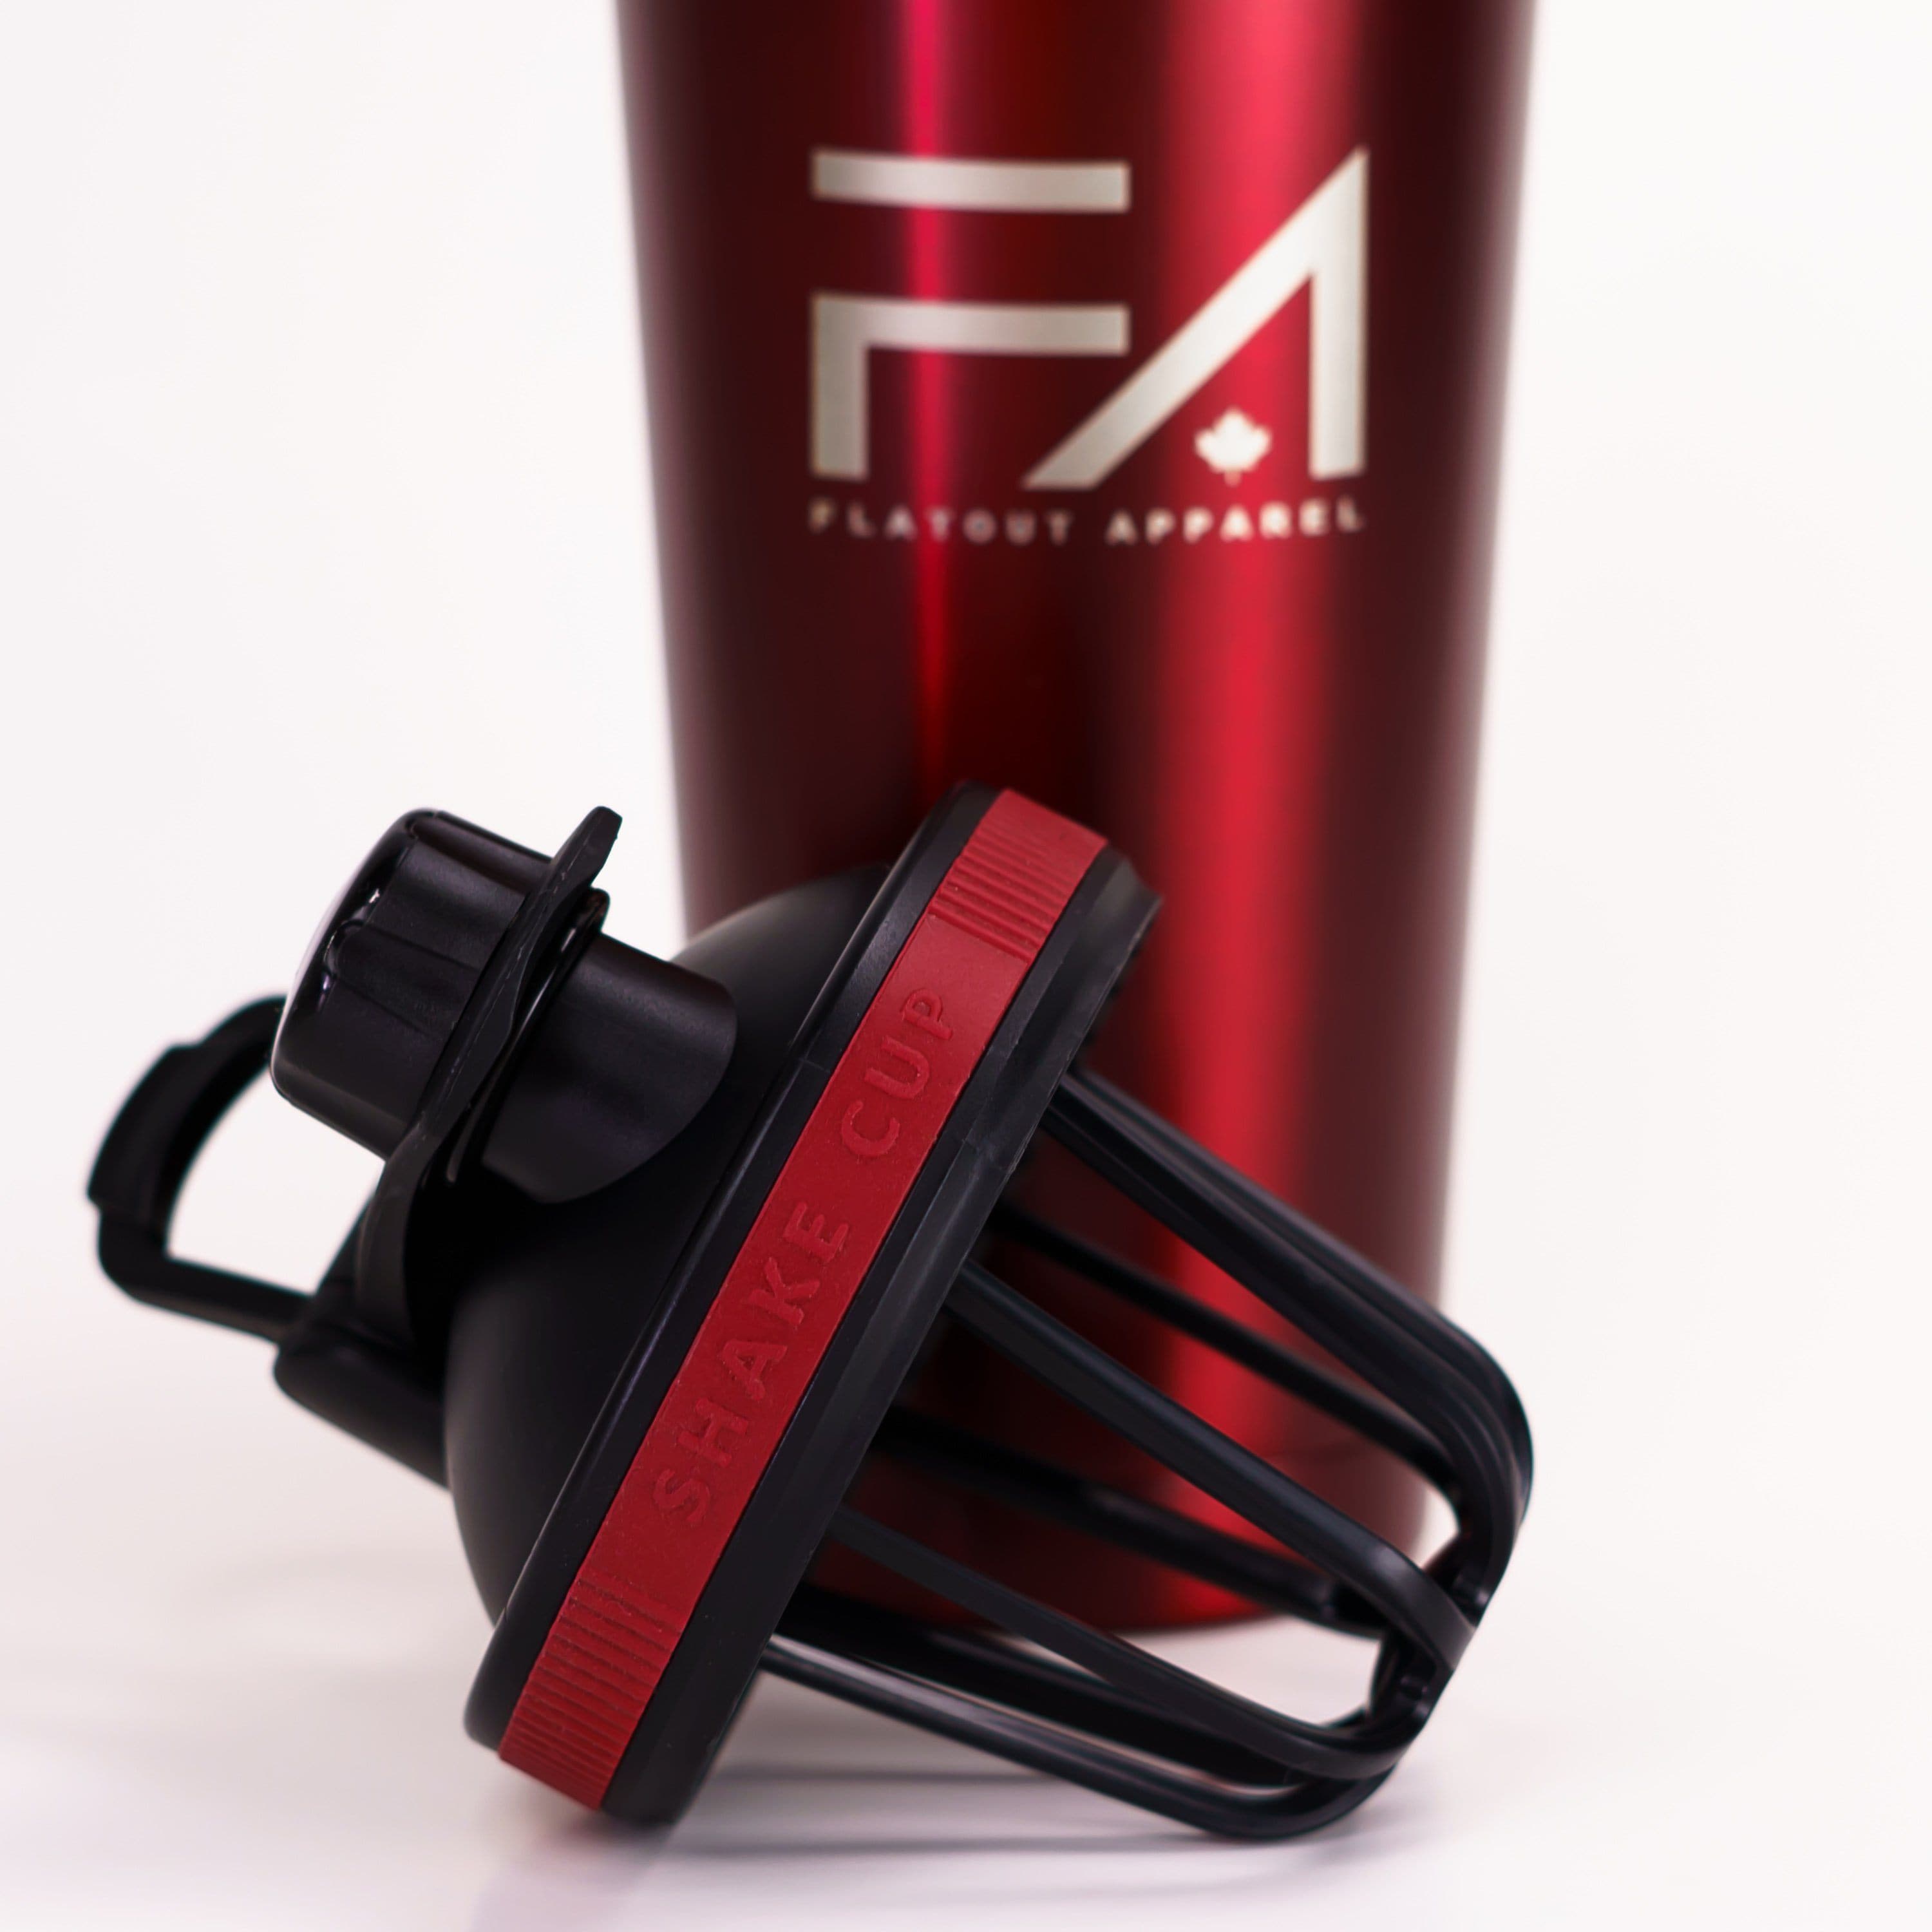 AON Shaker Red 25oz